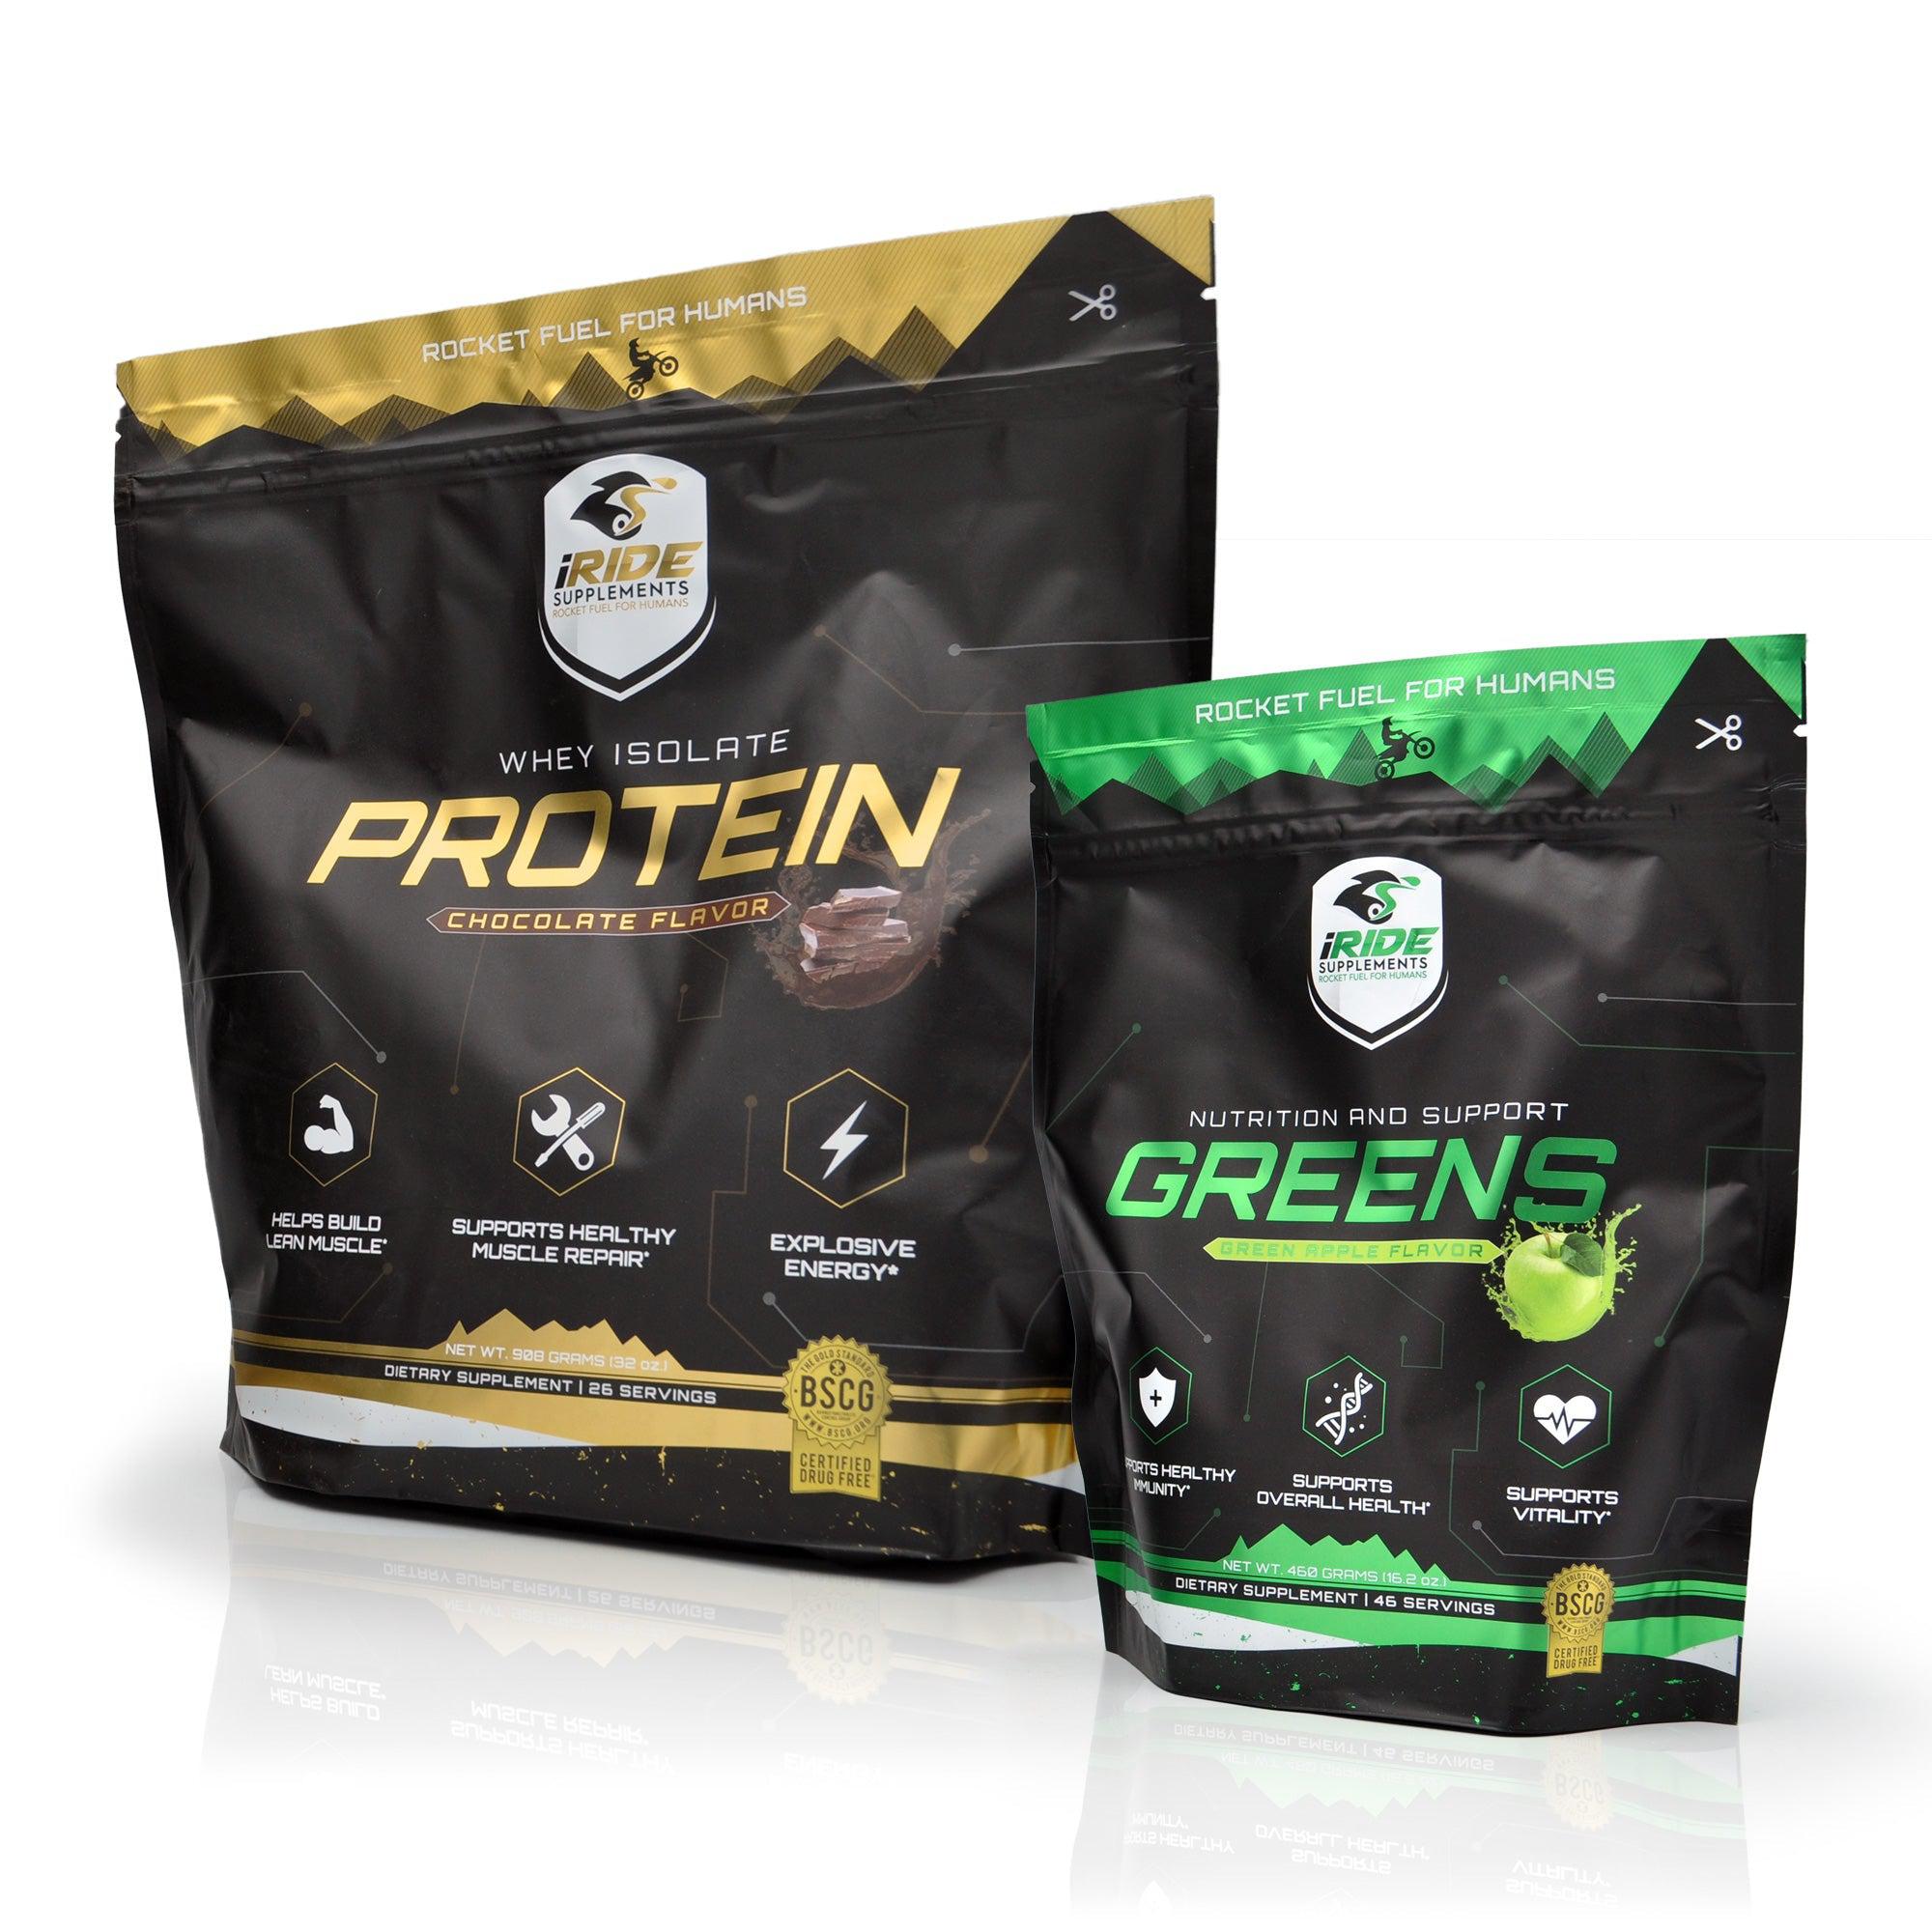 iRide reovery bundle featuring Protein and Greens powders